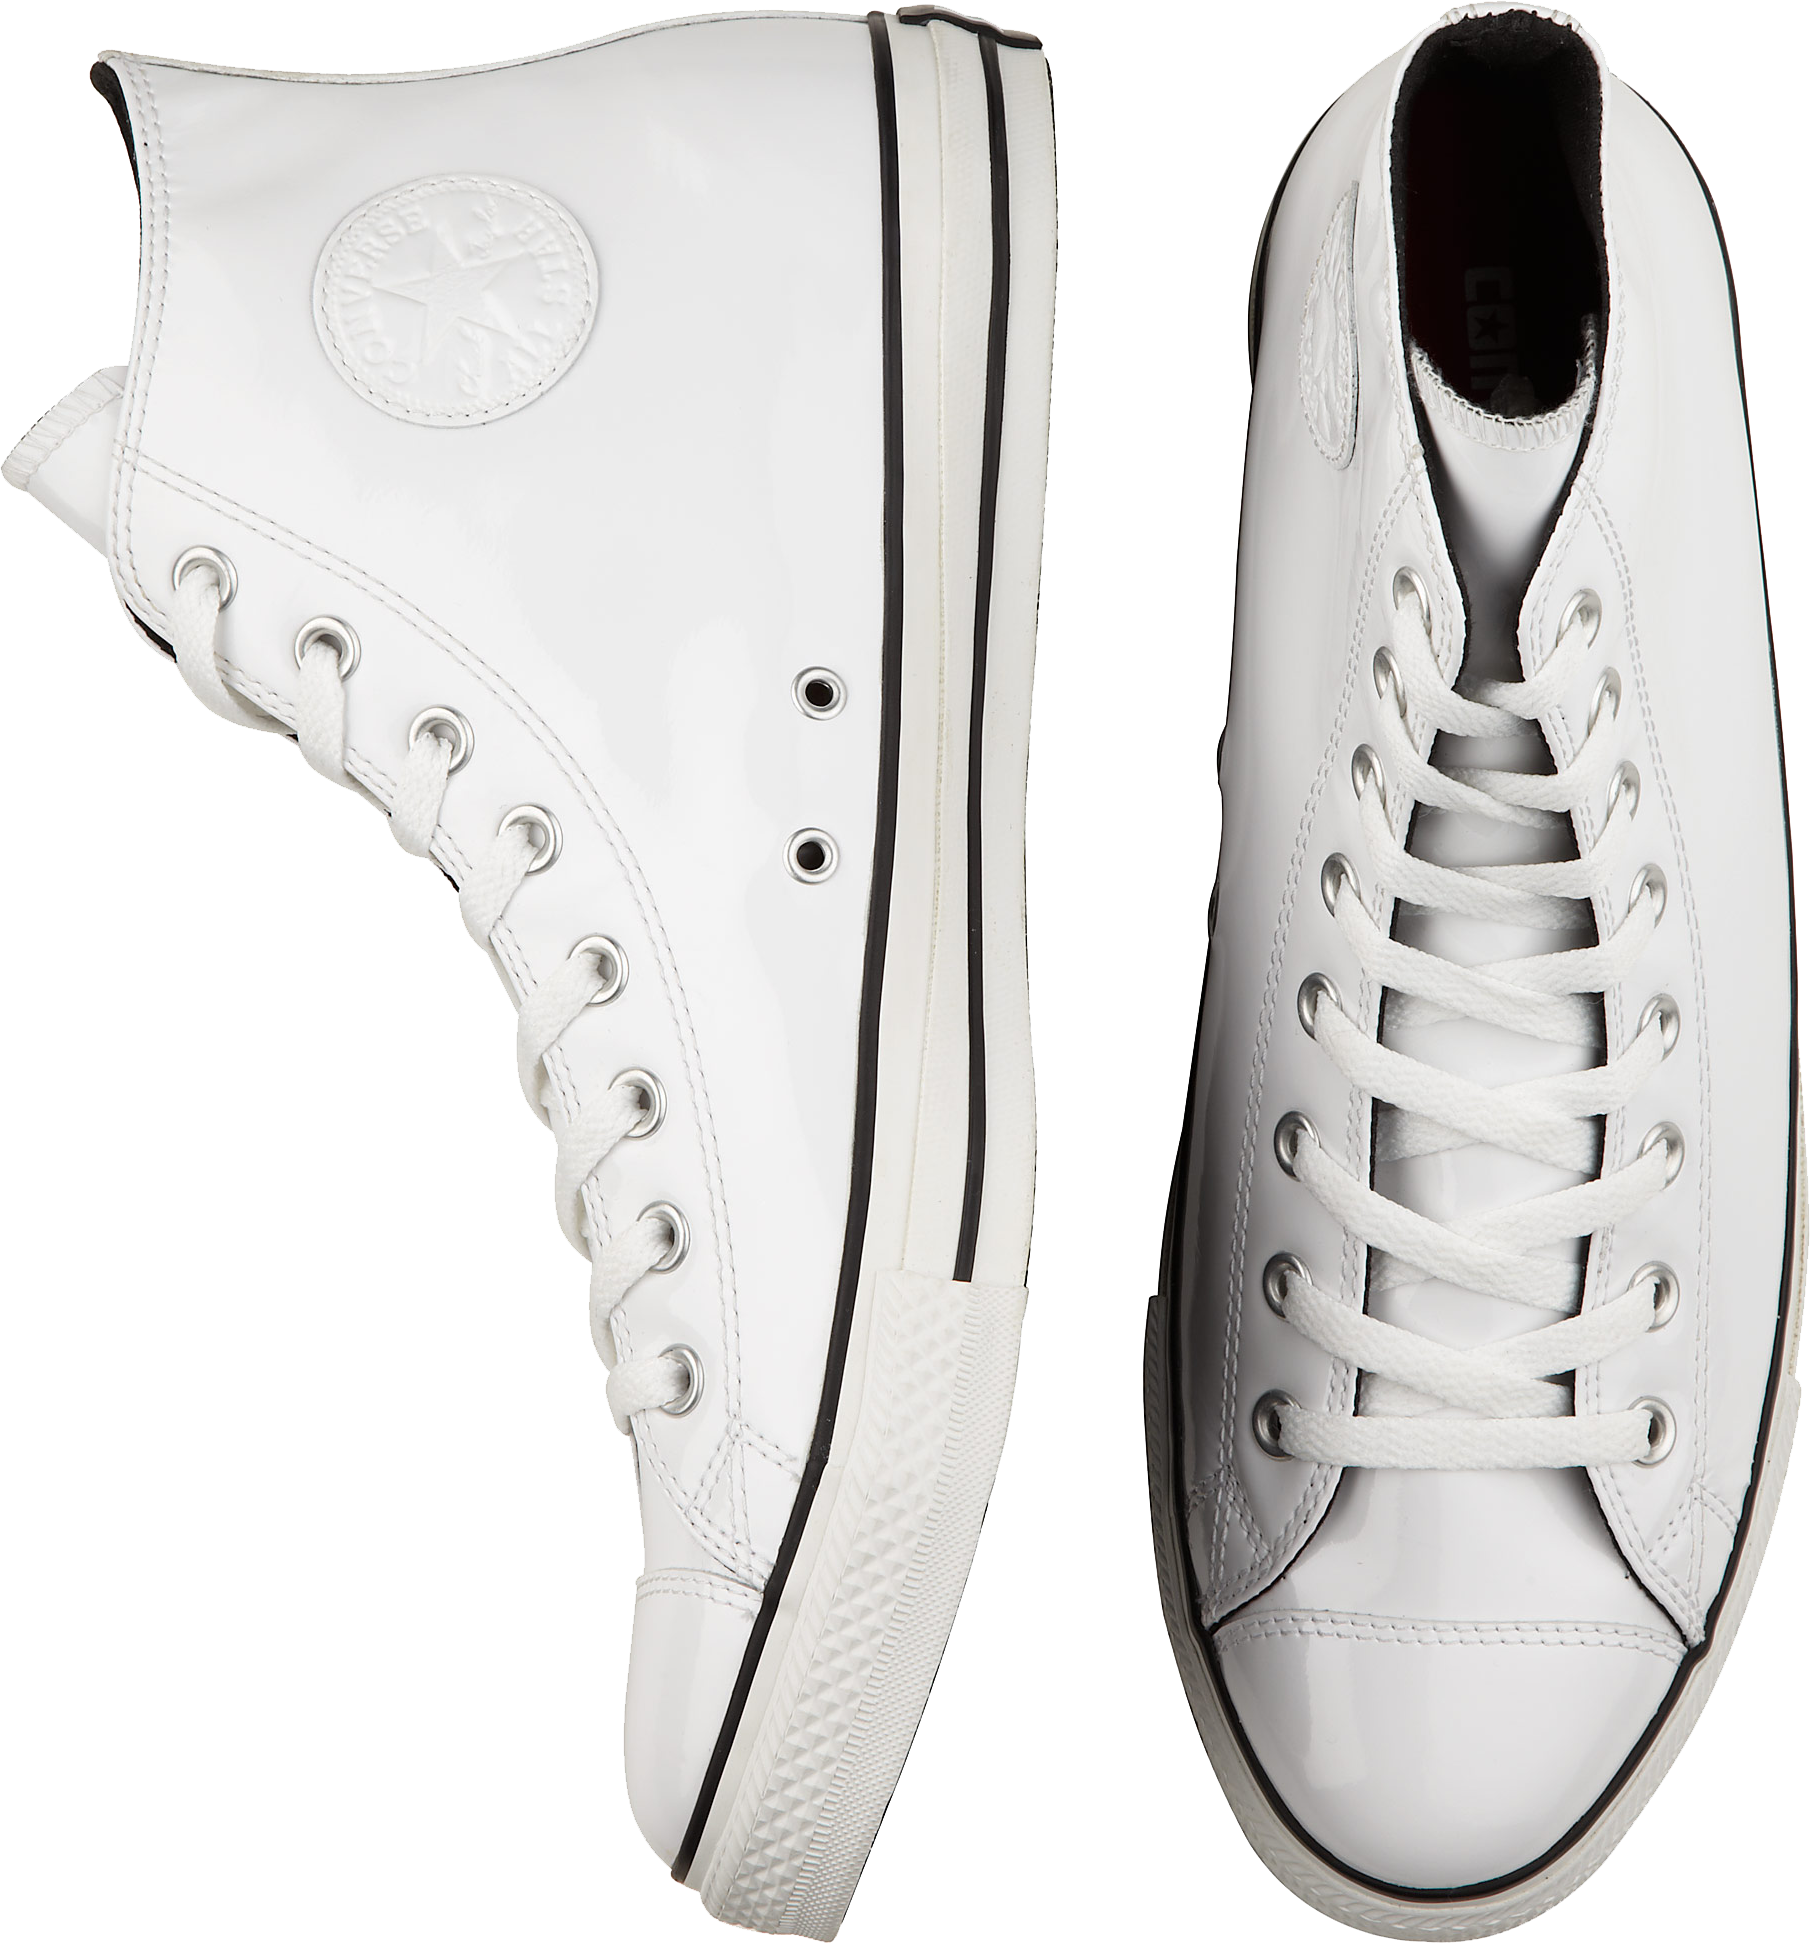 patent leather converse men's wearhouse